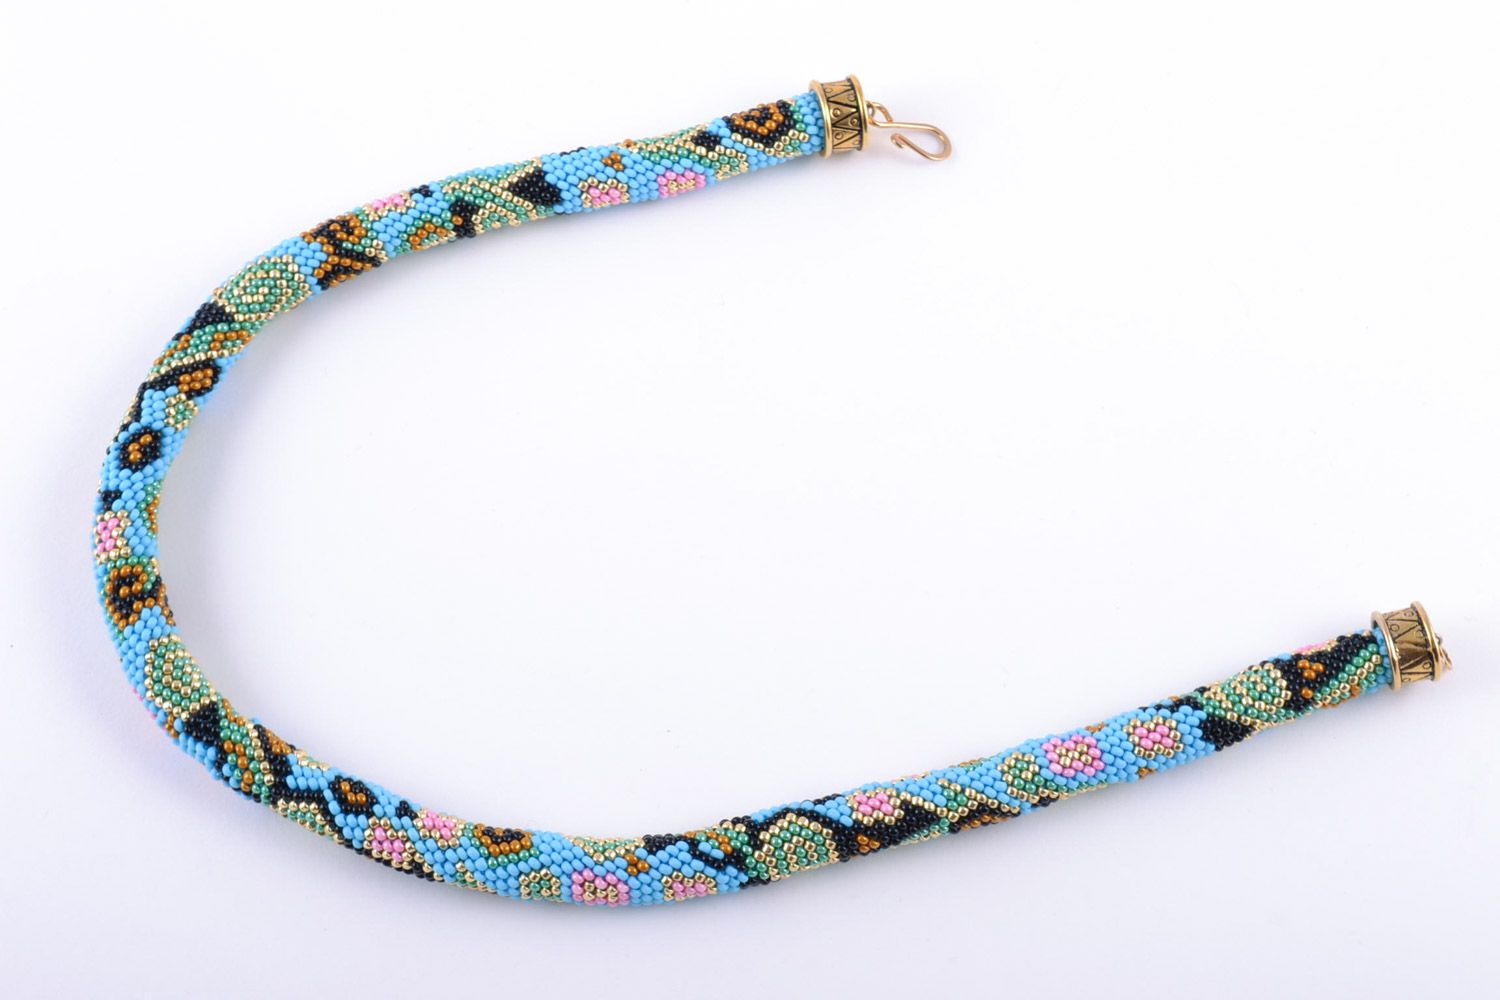 Handmade Czech bead cord necklace of turquoise color with unusual patterns photo 4